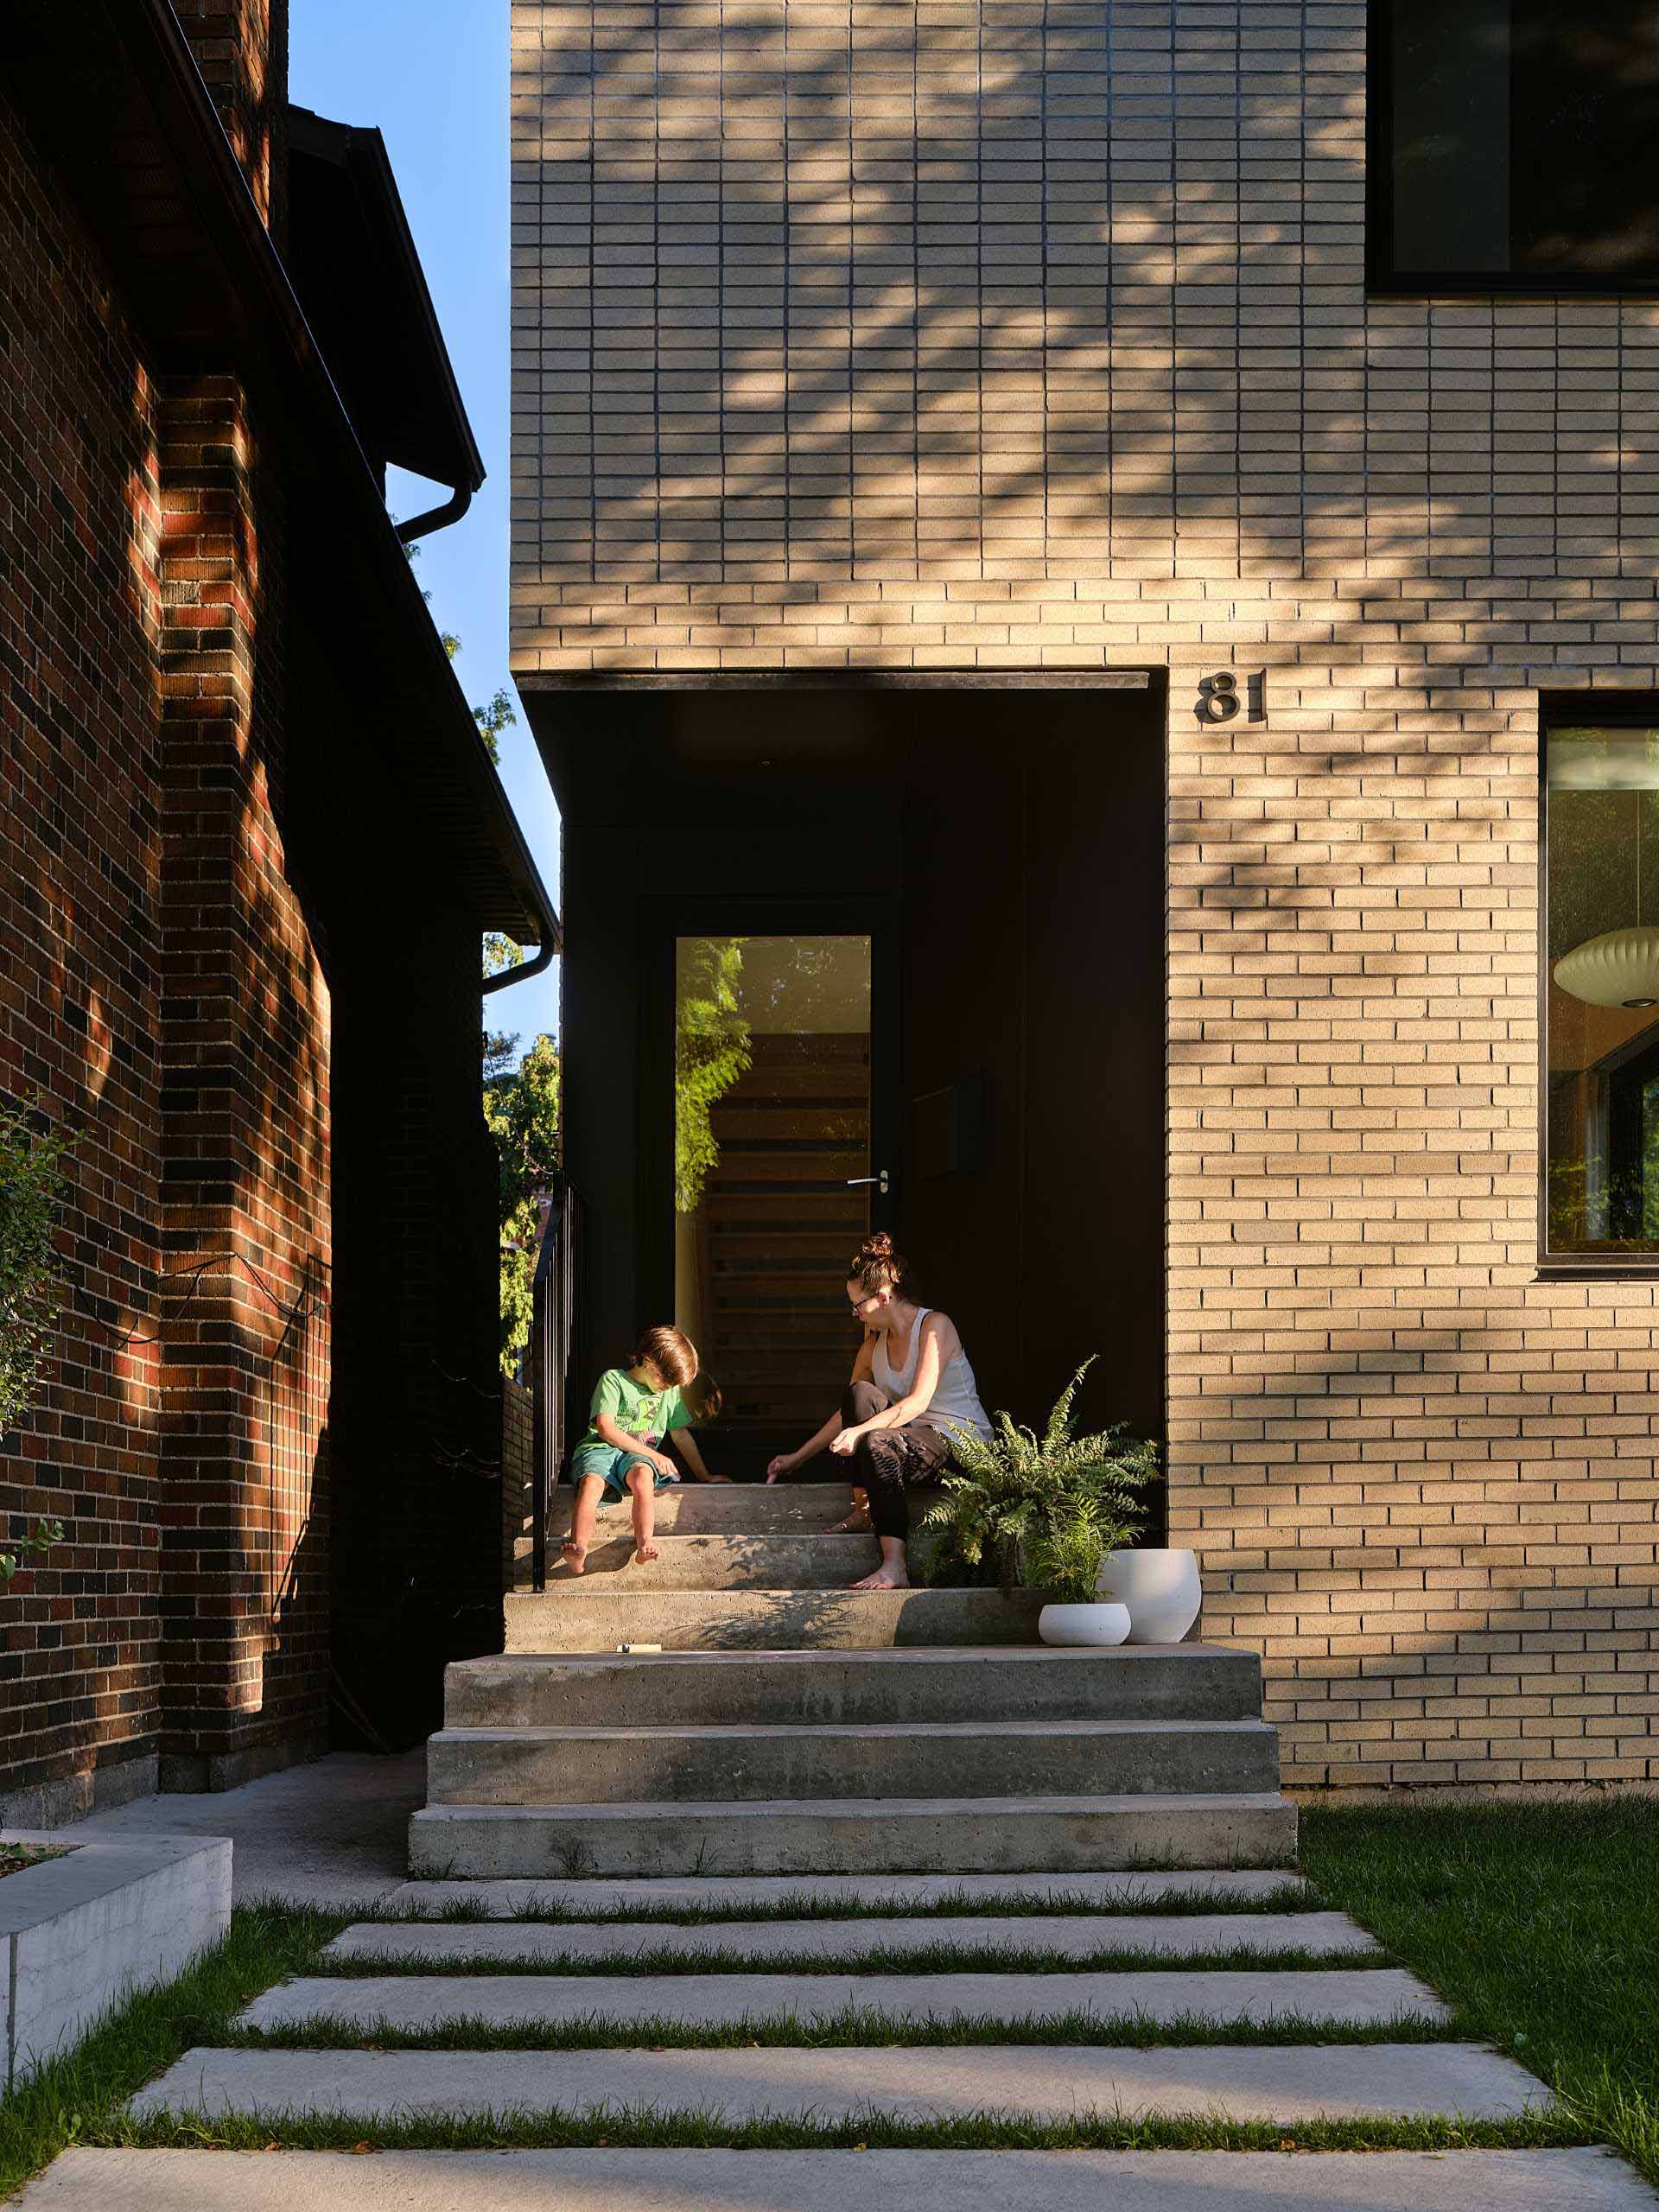 The front entry and third-floor deck of this modern home are carved from brick with contrasting black sintered stone panels.